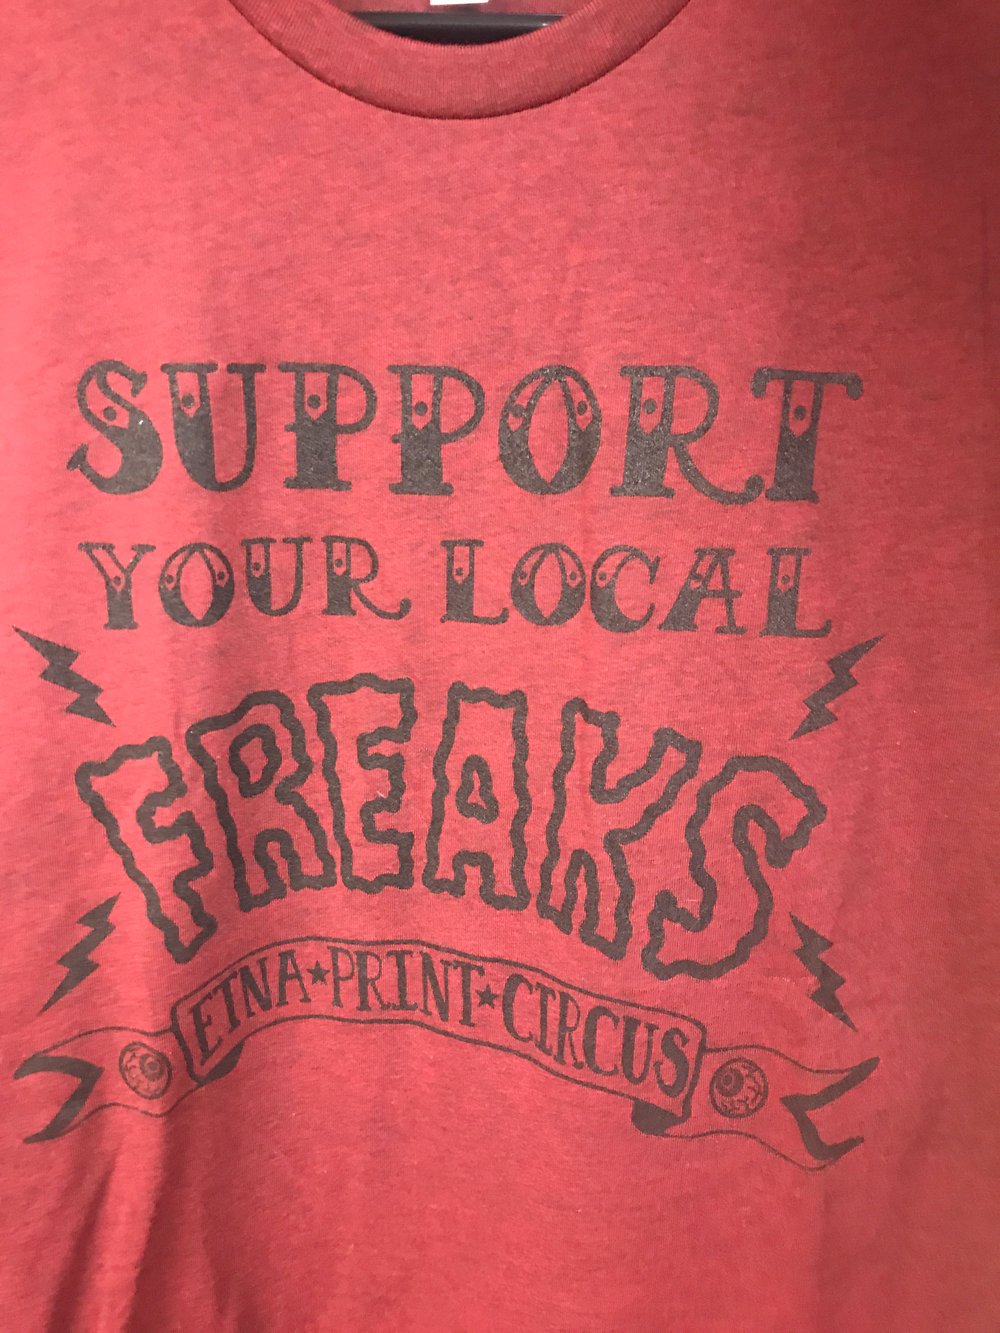 Image of Support Your Local Freaks